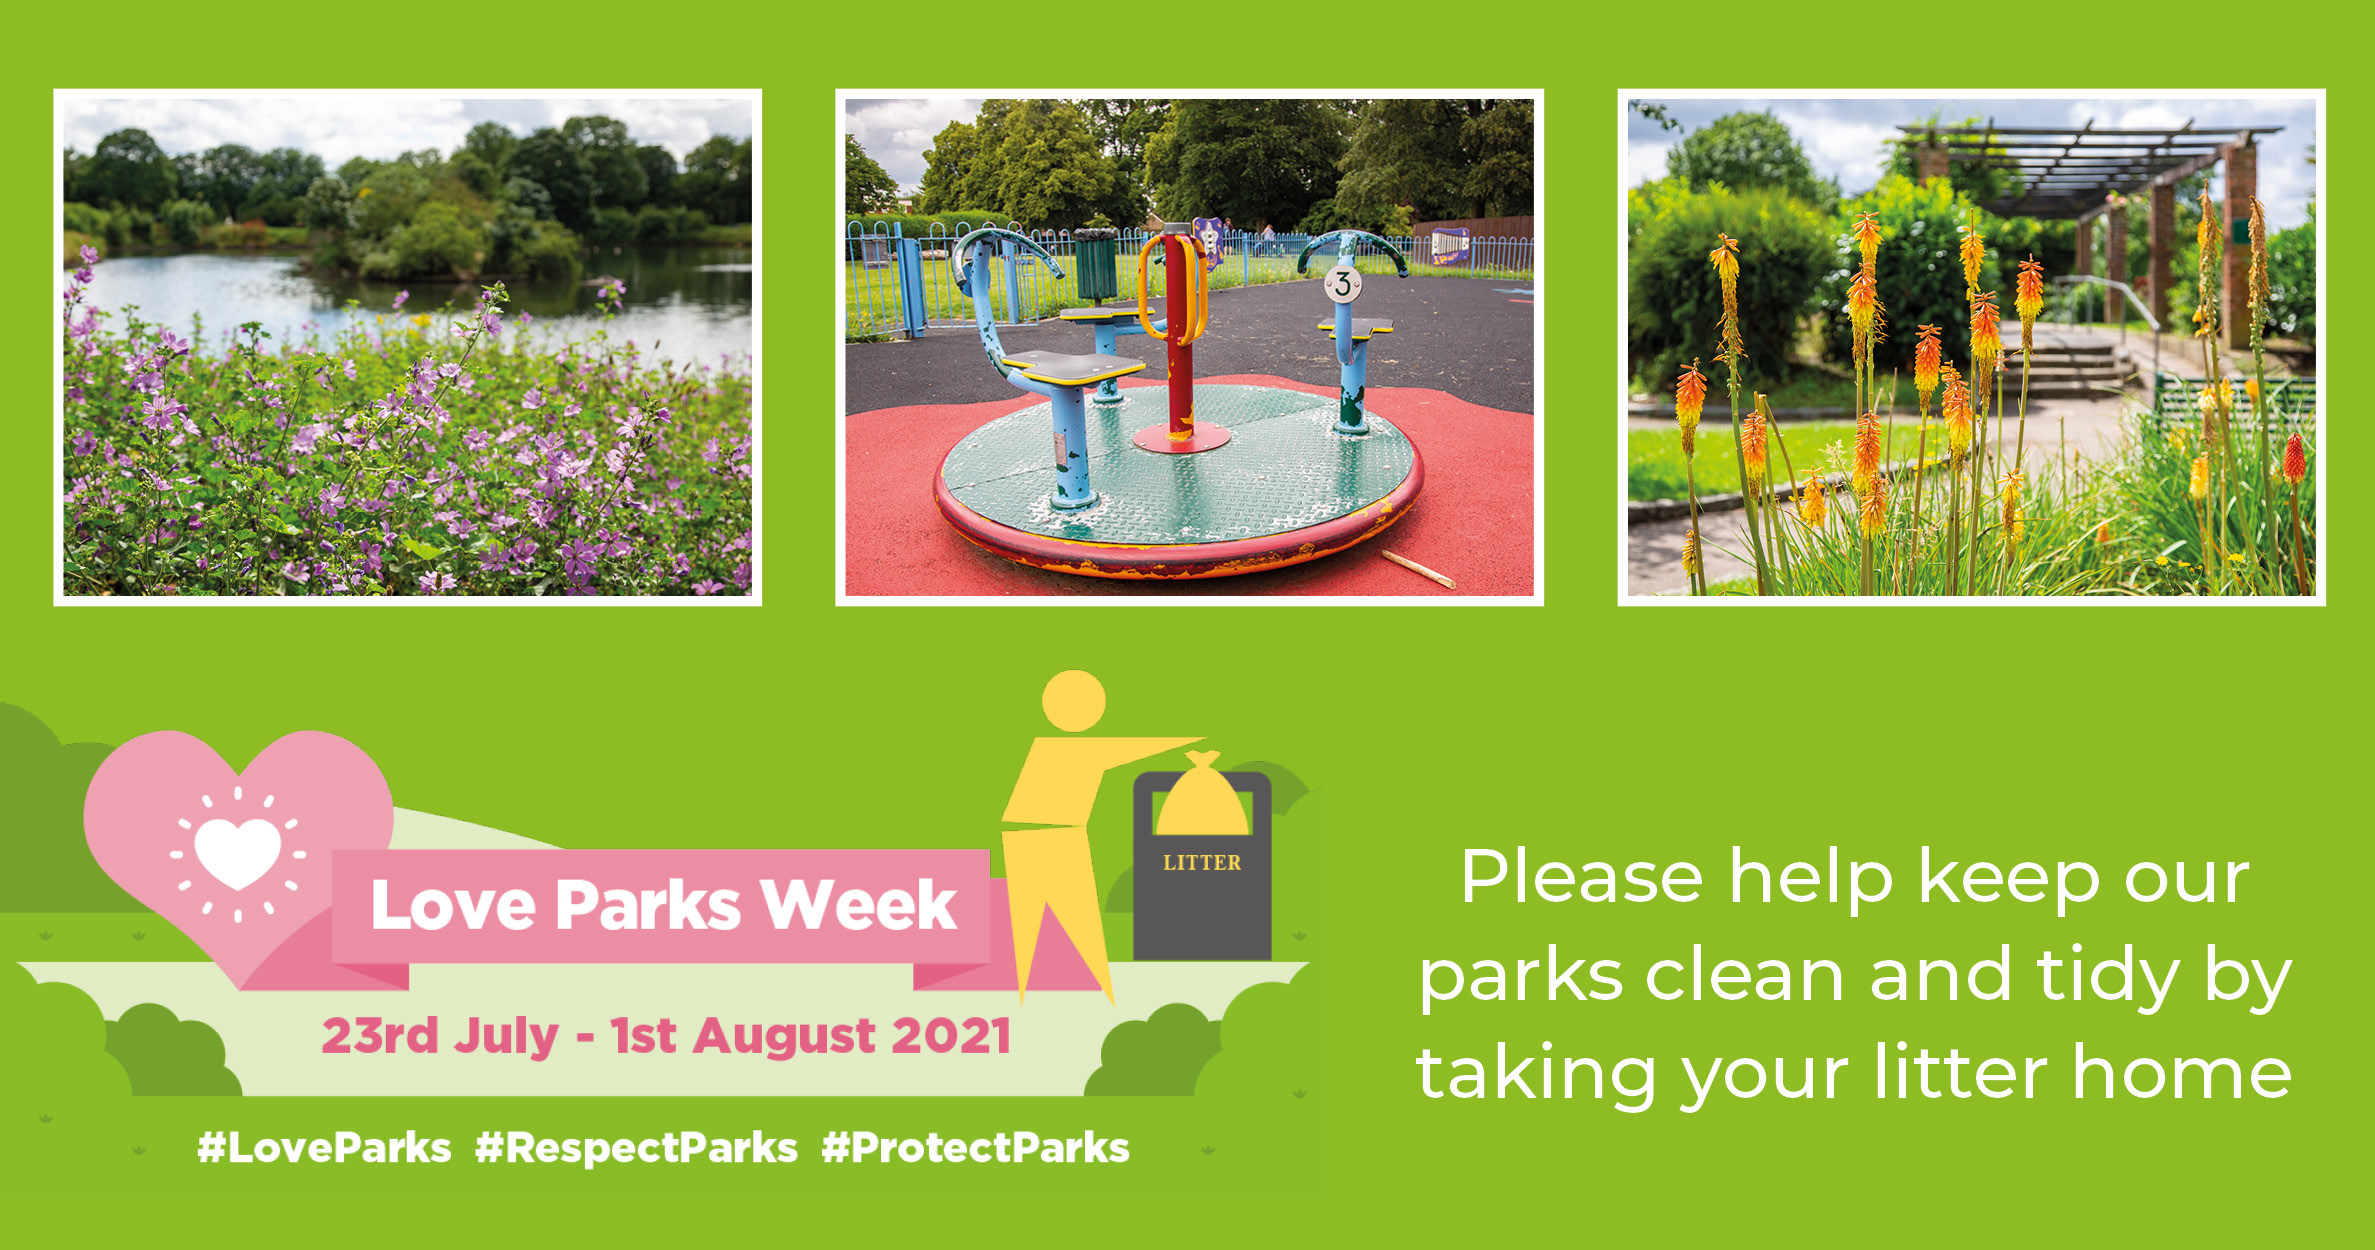 image of clean and tidy parks with message 'take your litter home'